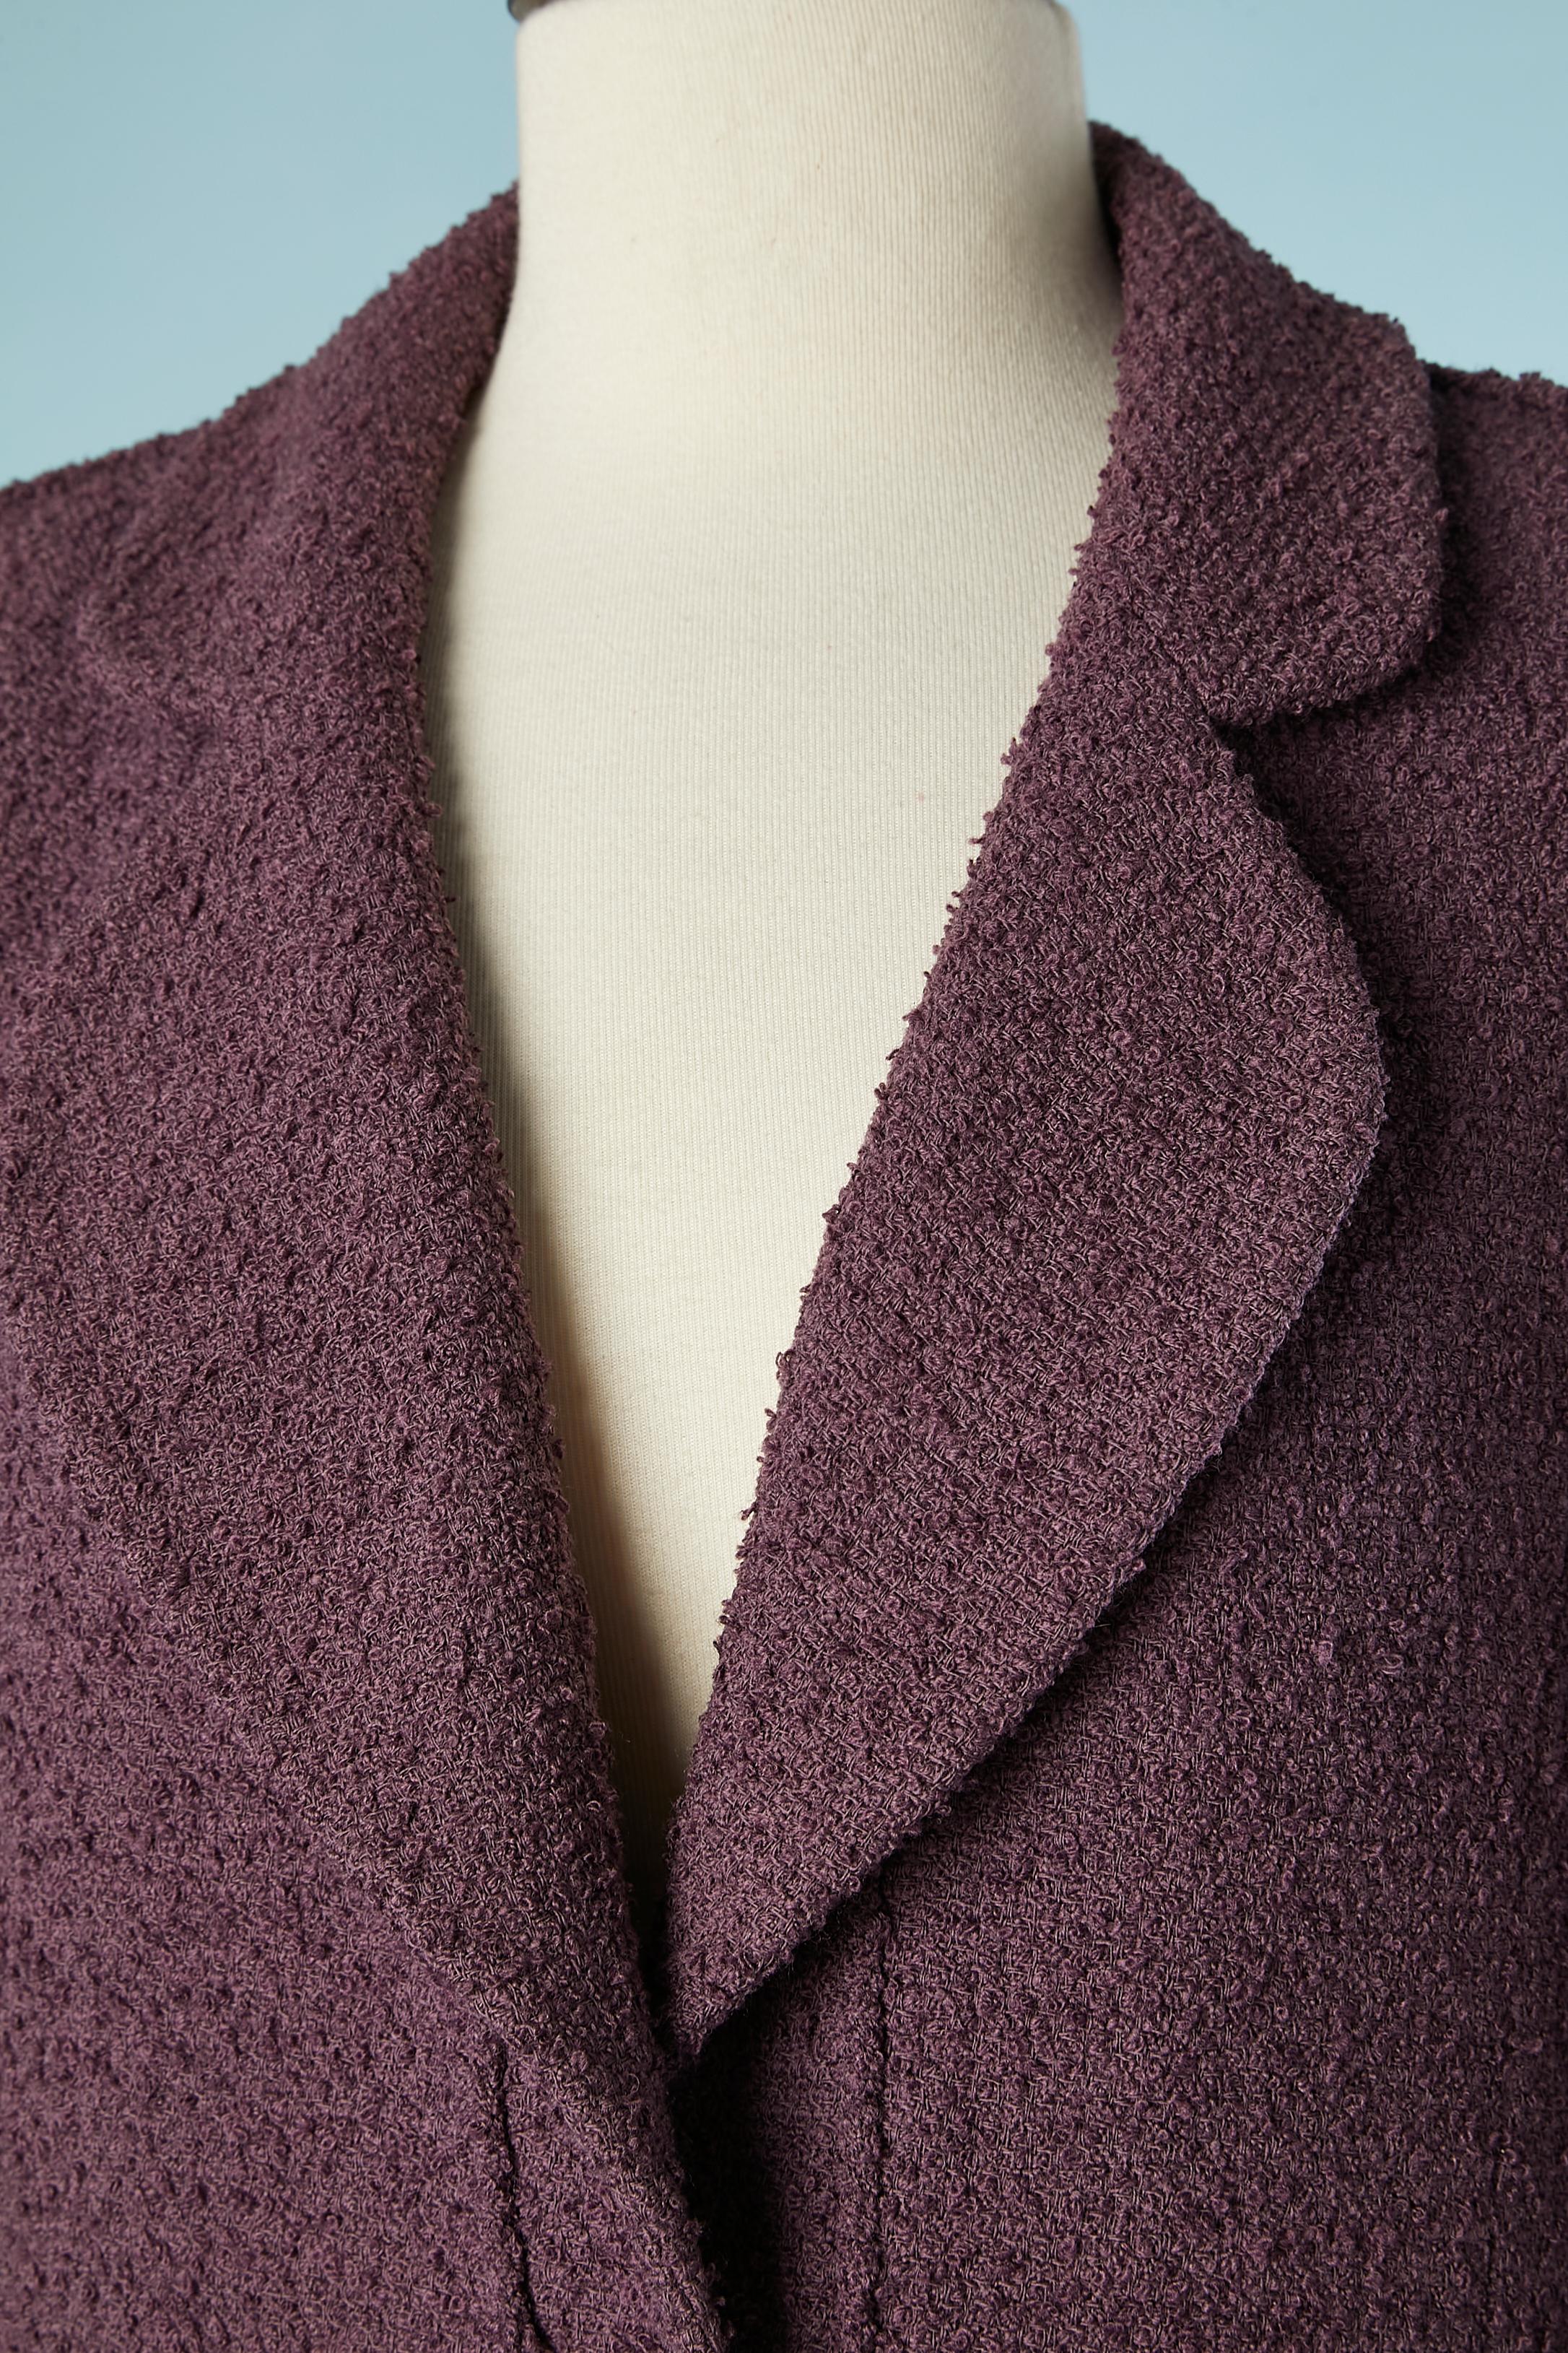 Purple tweed single breasted jacket. Branded button. Cut work on the sleeves. Shoulder-pad. Silk branded lining.
SIZE L ( no size tag, neither fabric composition)
